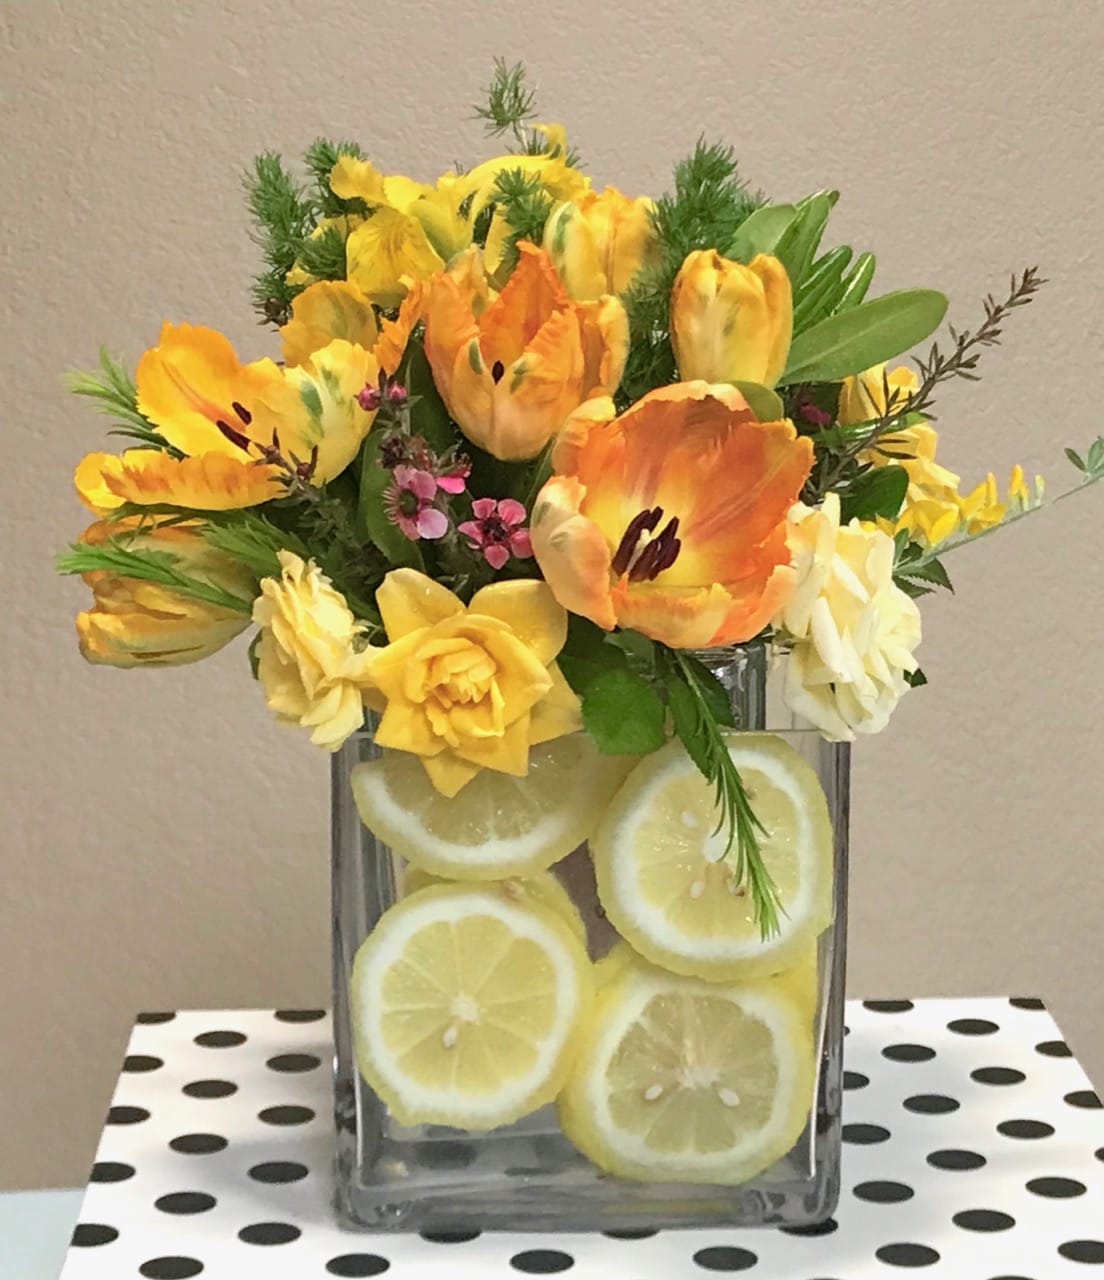 Lemon-Aid Cheer - This cheerful bouquet of yellow and orange flowers features tulips (seasonal), mini spray roses, and a slice or two of lemons for a great pick-me-up.